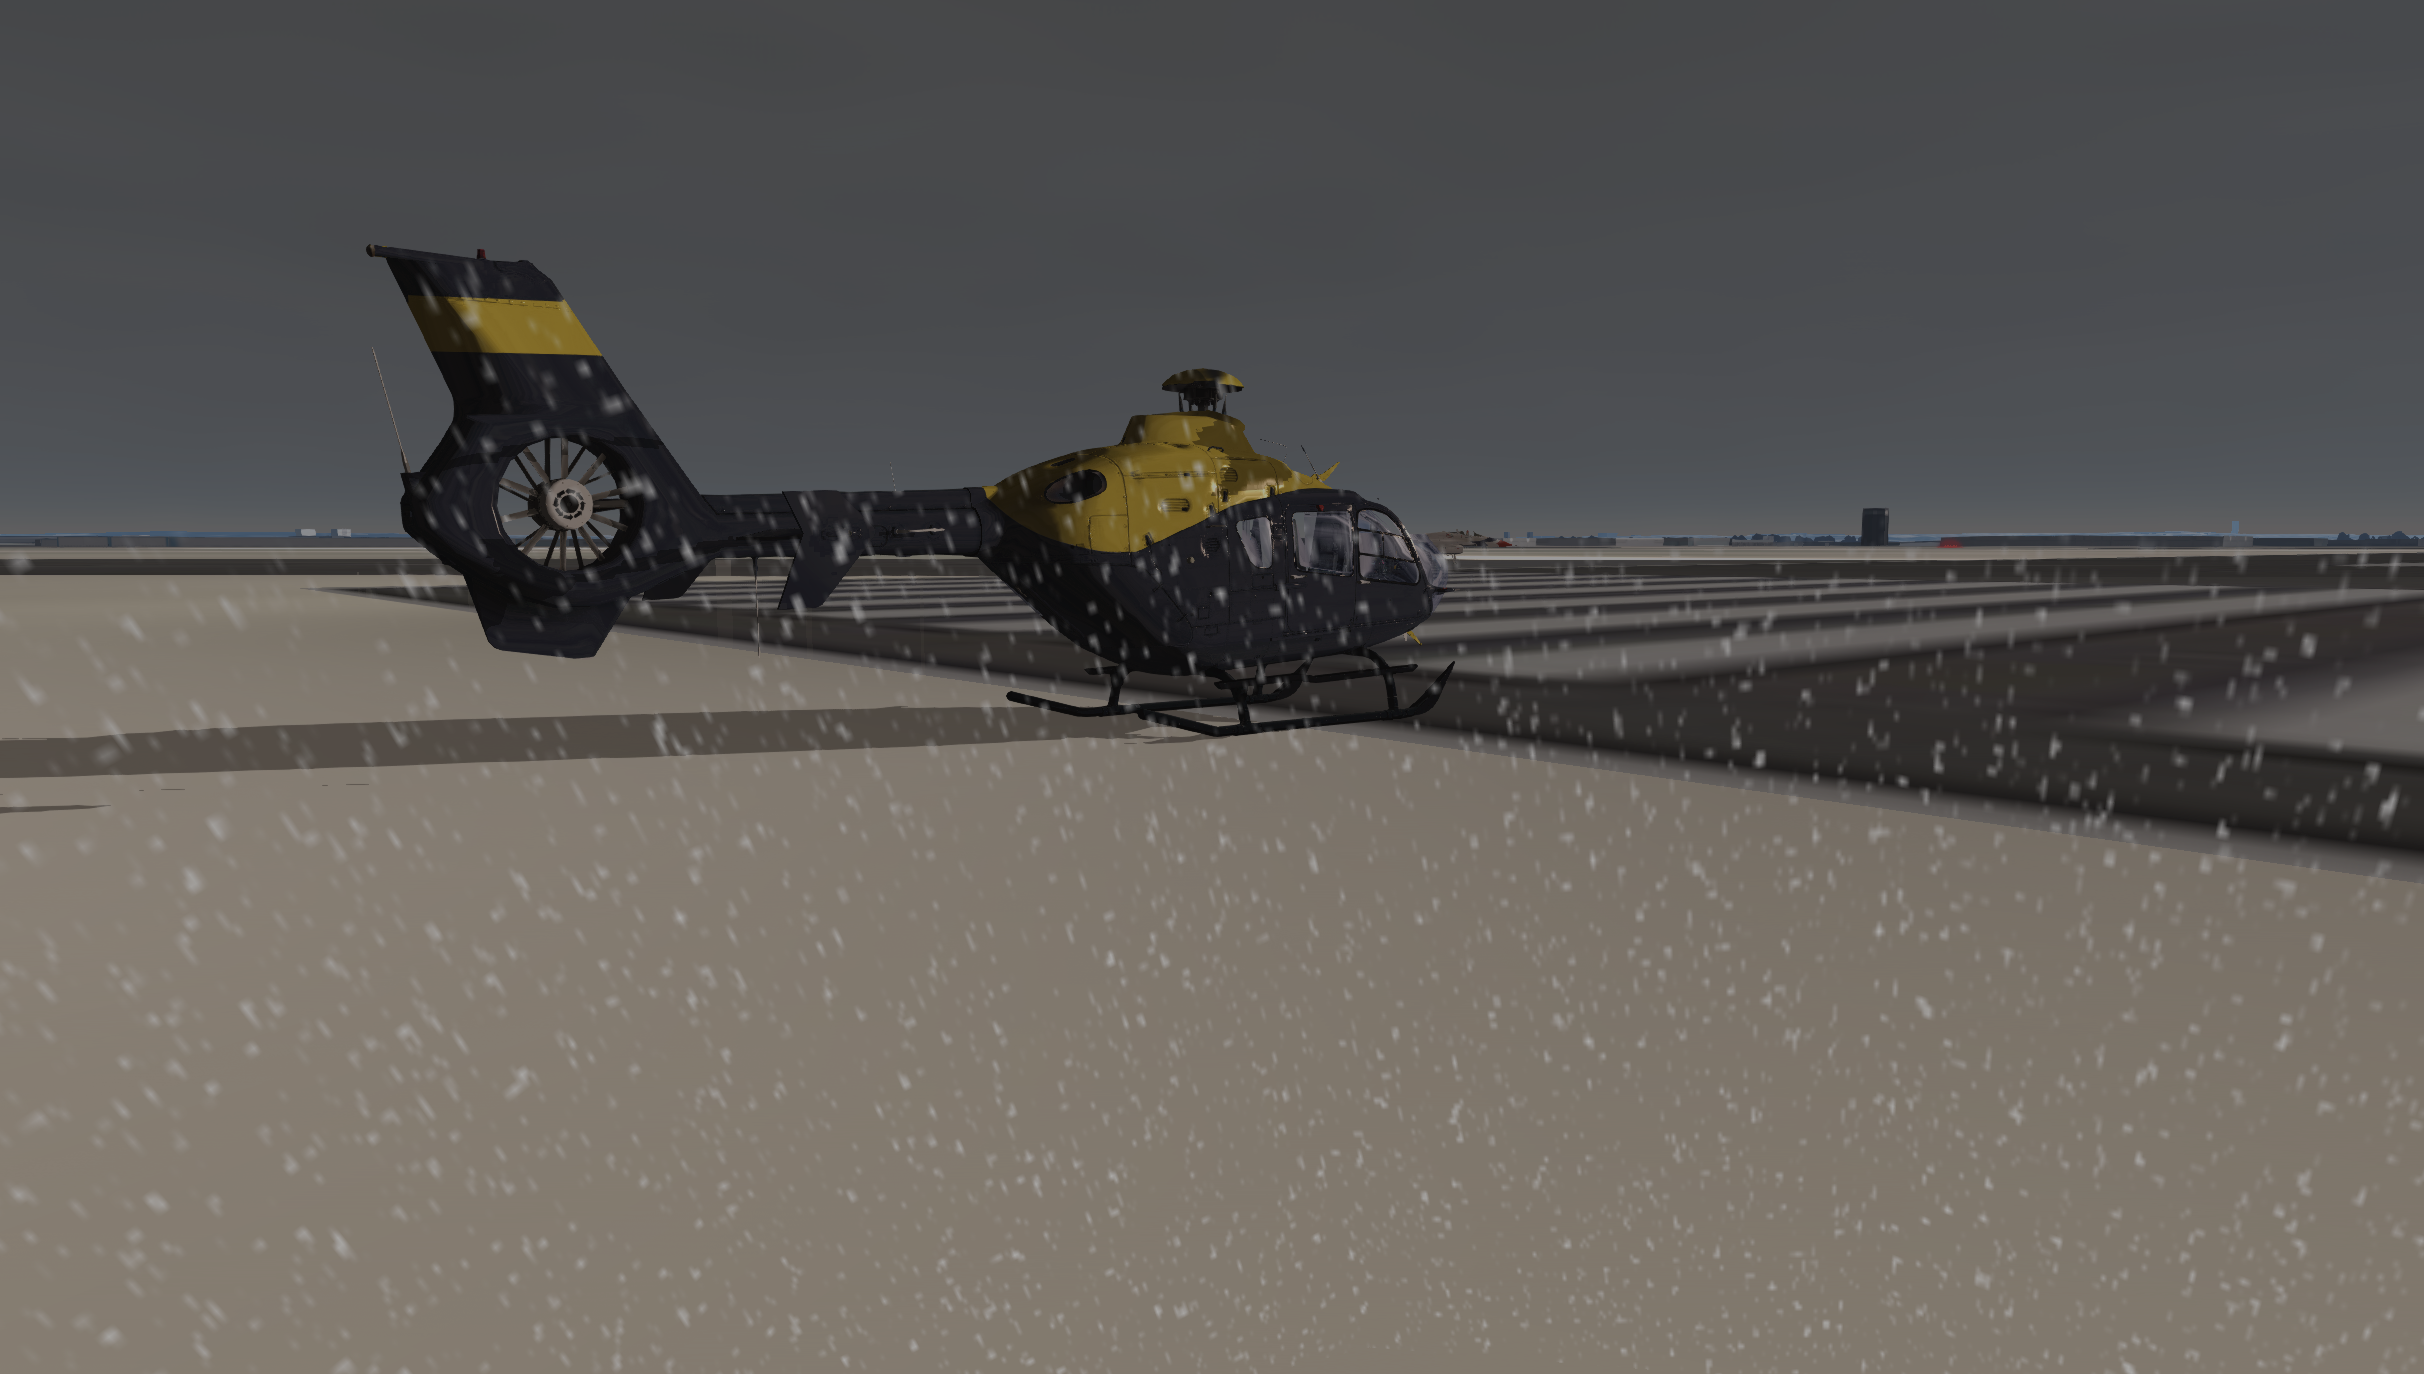 Aircraft Helicopters Night Snow Scenery Rain Snowing Clouds Overcast Runway Eurocopter EC135 Environ 2424x1374